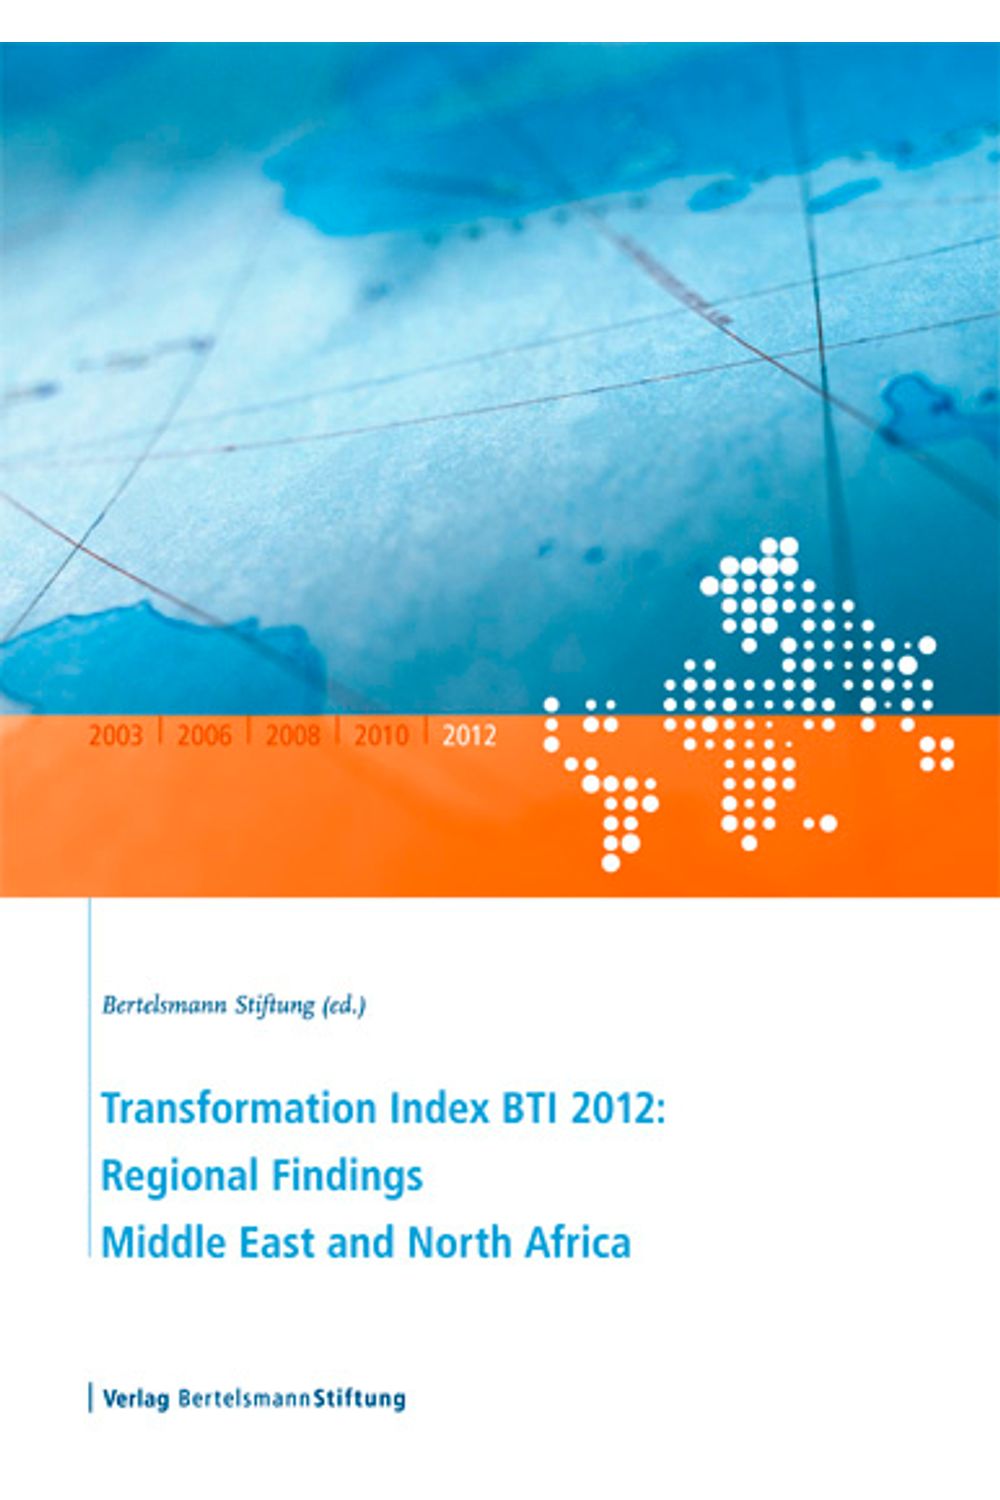 bw-transformation-index-bti-2012-regional-findings-middle-east-and-north-africa-verlag-bertelsmann-stiftung-9783867934510